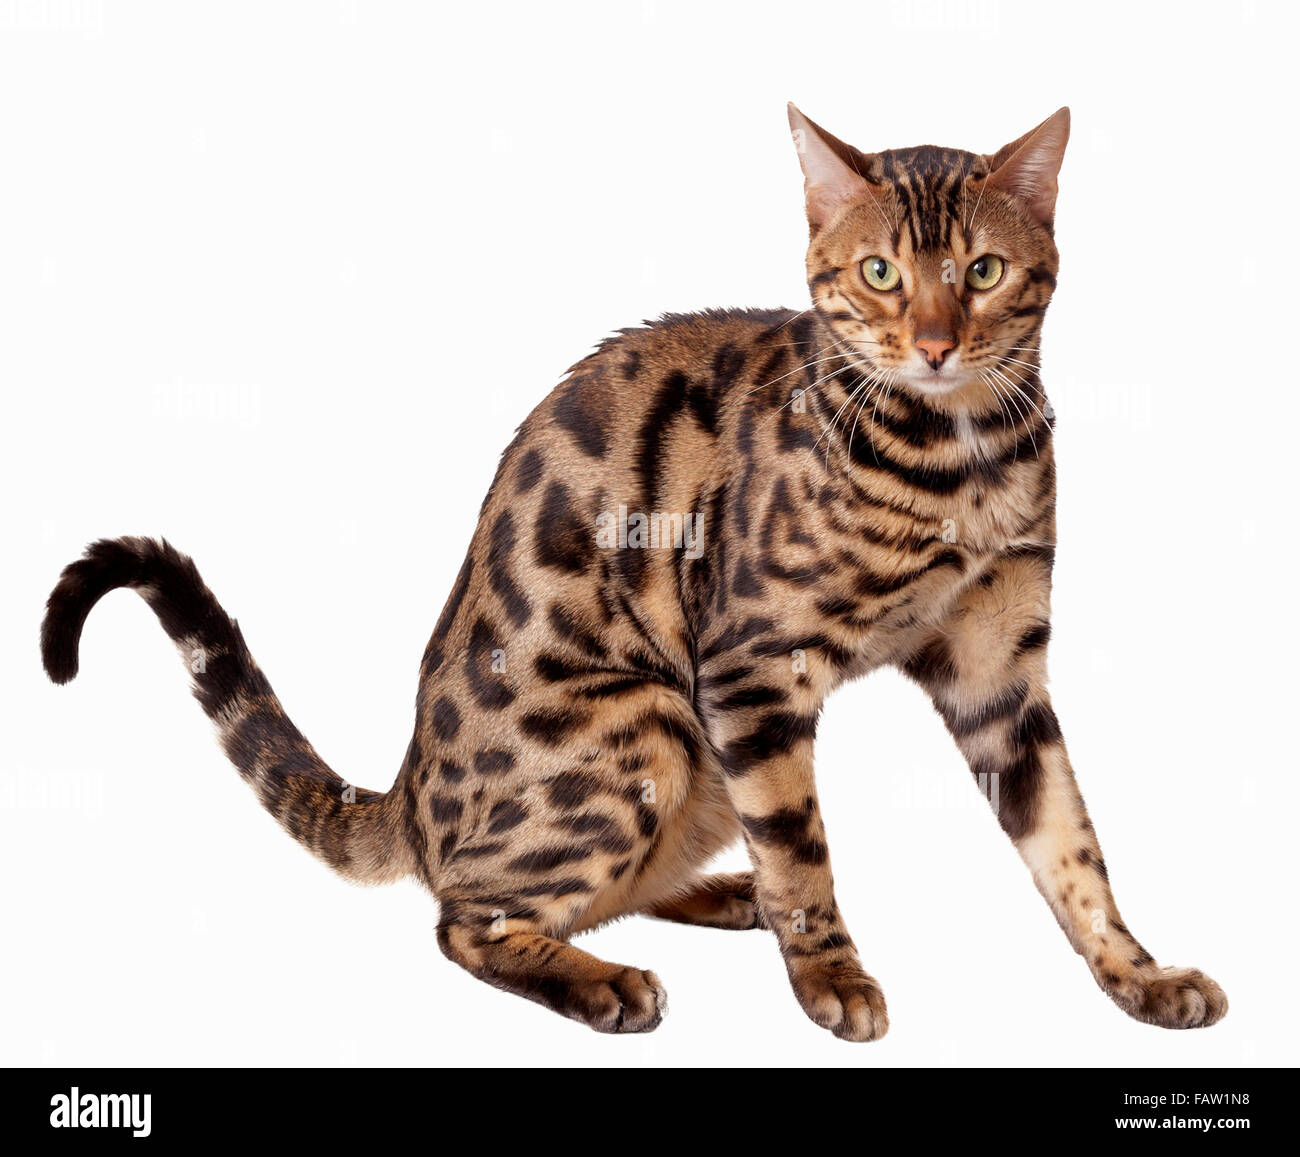 Male Bengal cat sitting and staring straight ahead  Model Release: No.  Property Release: No. Stock Photo